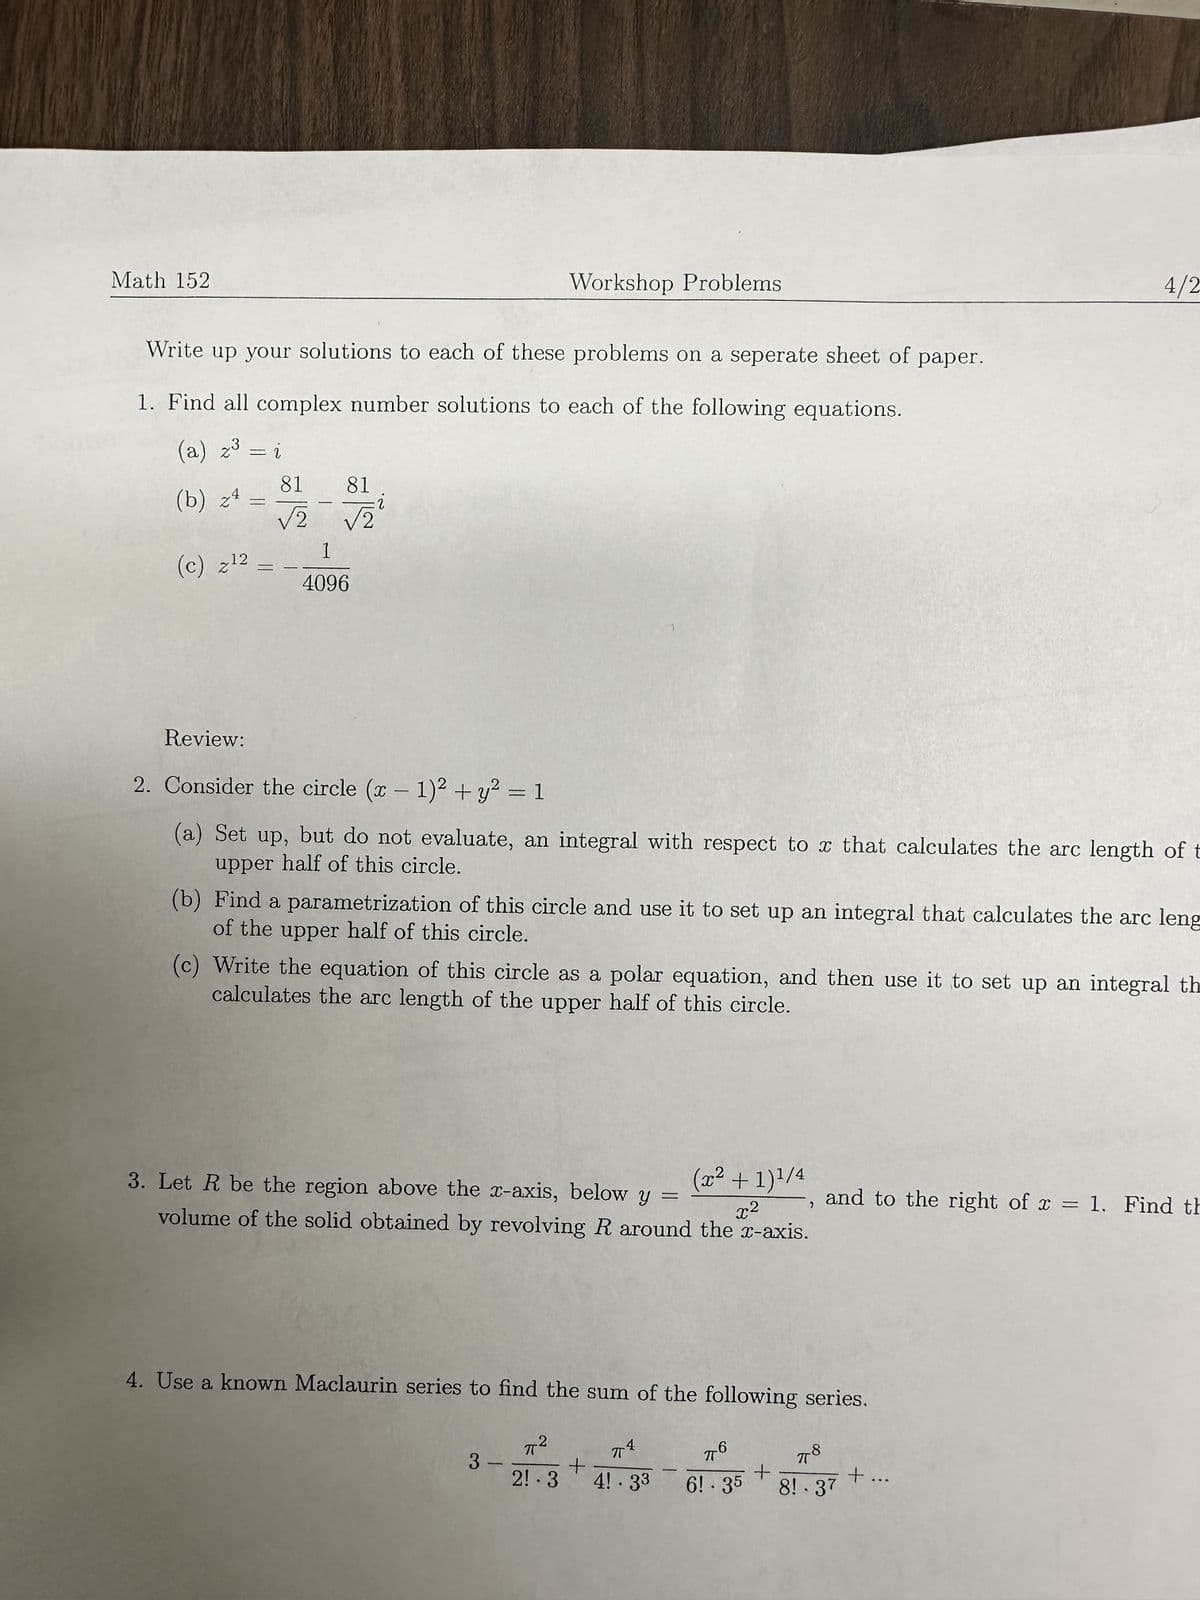 Math 152
Workshop Problems
Write up your solutions to each of these problems on a seperate sheet of paper.
1. Find all complex number solutions to each of the following equations.
(a) z³
(b) z4
= 2
81 81
=
√2 √2
(c) z12
1
4096
4/2
Review:
2. Consider the circle (x - 1)² + y² = 1
(a) Set up, but do not evaluate, an integral with respect to x that calculates the arc length of t
upper half of this circle.
(b) Find a parametrization of this circle and use it to set up an integral that calculates the arc leng
of the upper half of this circle.
(c) Write the equation of this circle as a polar equation, and then use it to set up an integral th
calculates the arc length of the upper half of this circle.
2
(x² + 1) 1/4
3. Let R be the region above the x-axis, below y
x2
volume of the solid obtained by revolving R around the x-axis.
=
,
and to the right of x = 1. Find th
x=
4. Use a known Maclaurin series to find the sum of the following series.
π²
3-
πT
πο
+
π8
2! 3 4! 33
6! .35
+
+...
8!.37